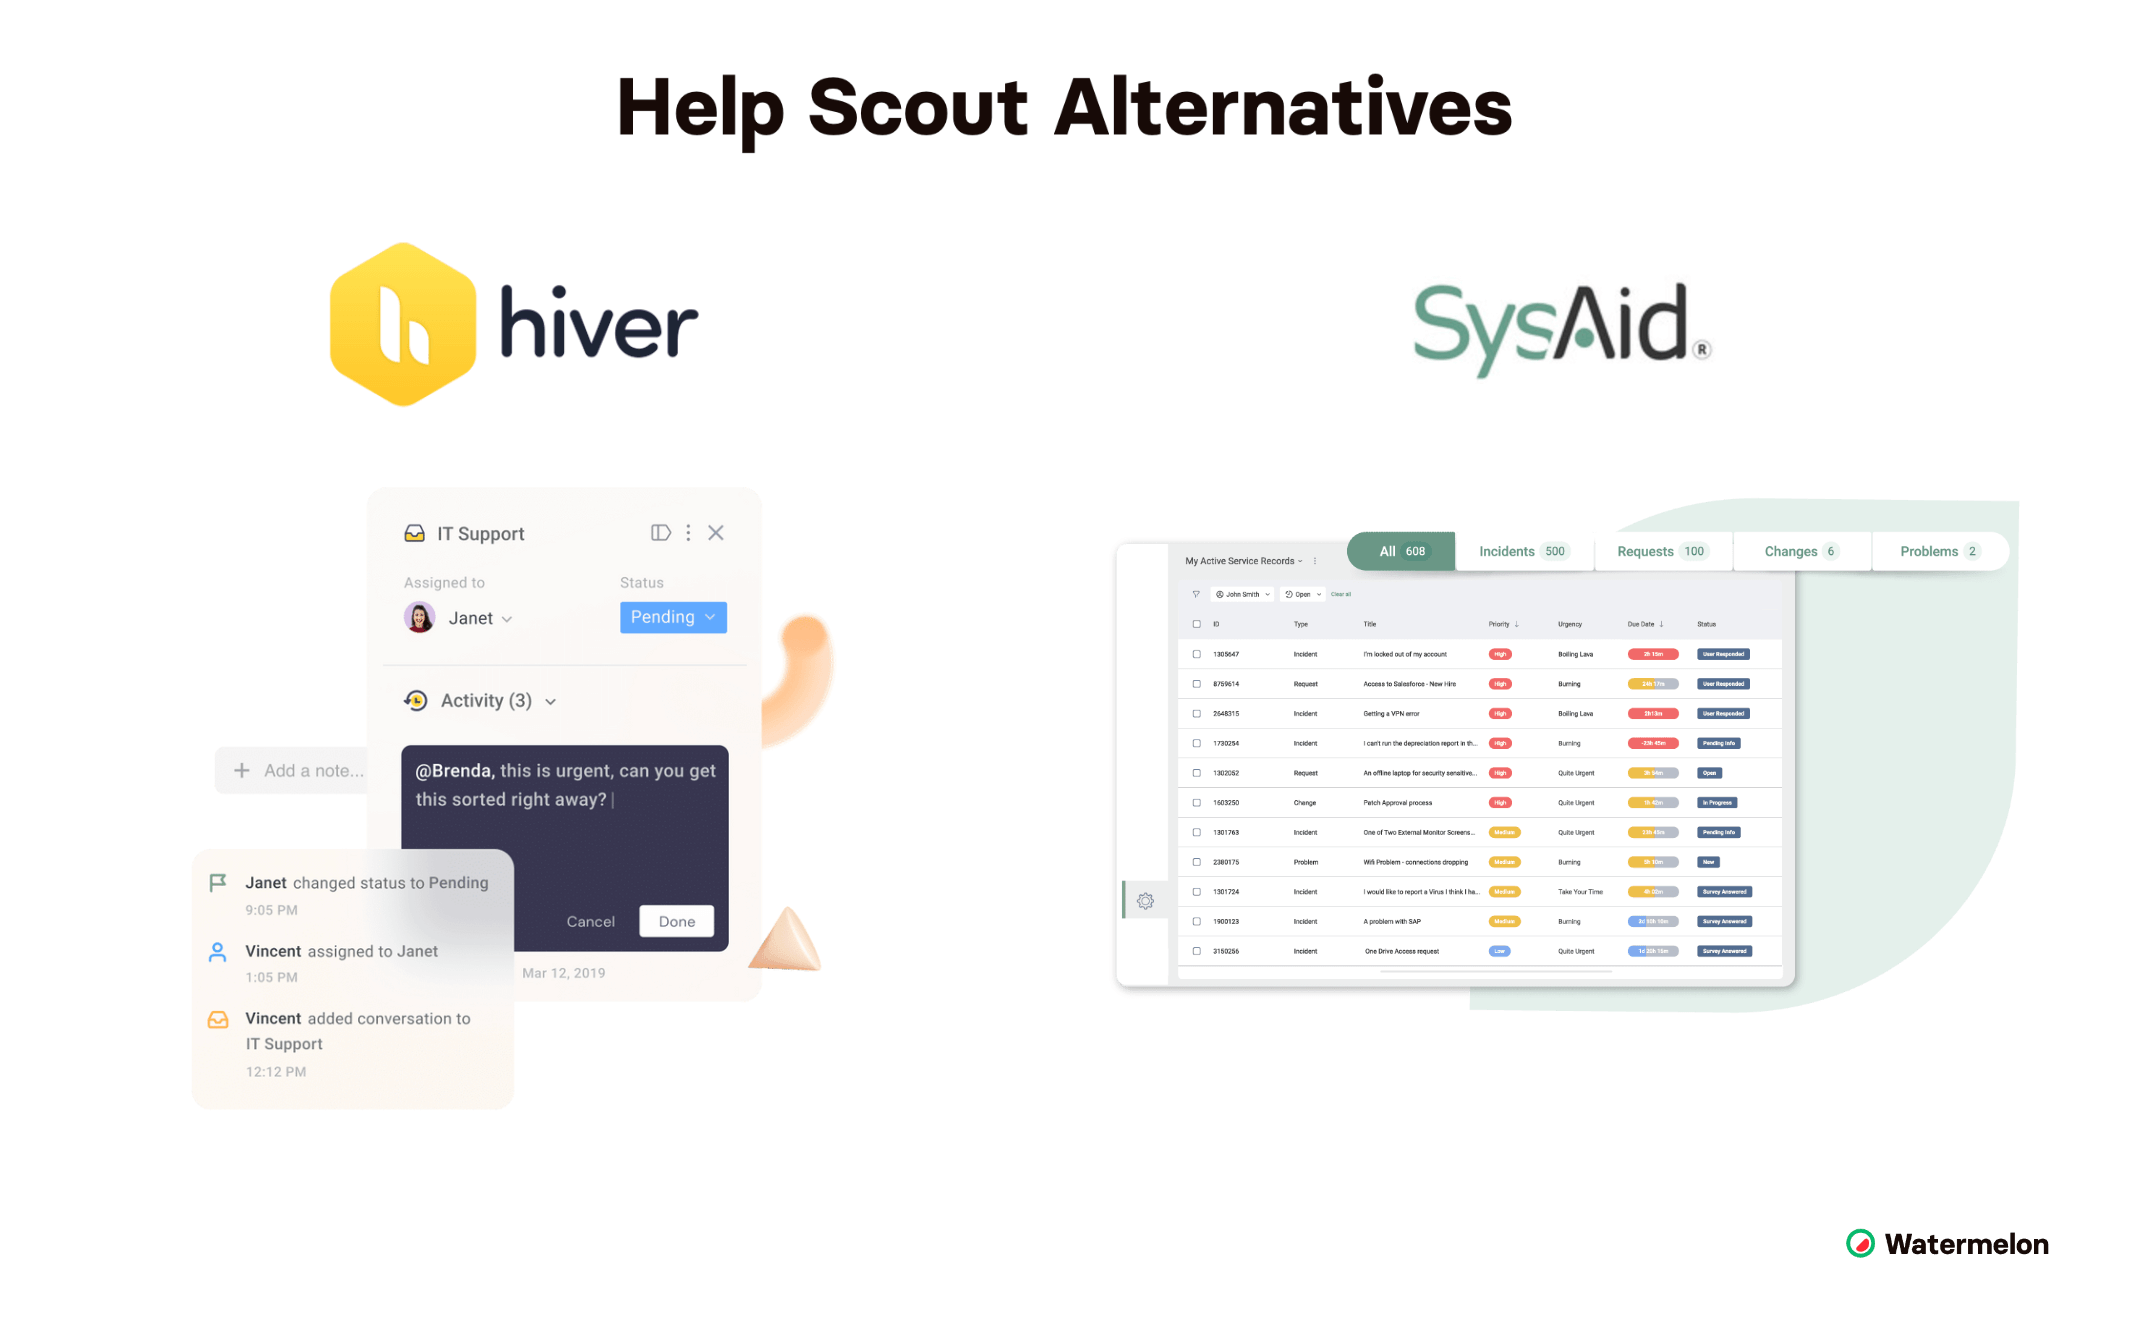 Alternatives to Help Scout